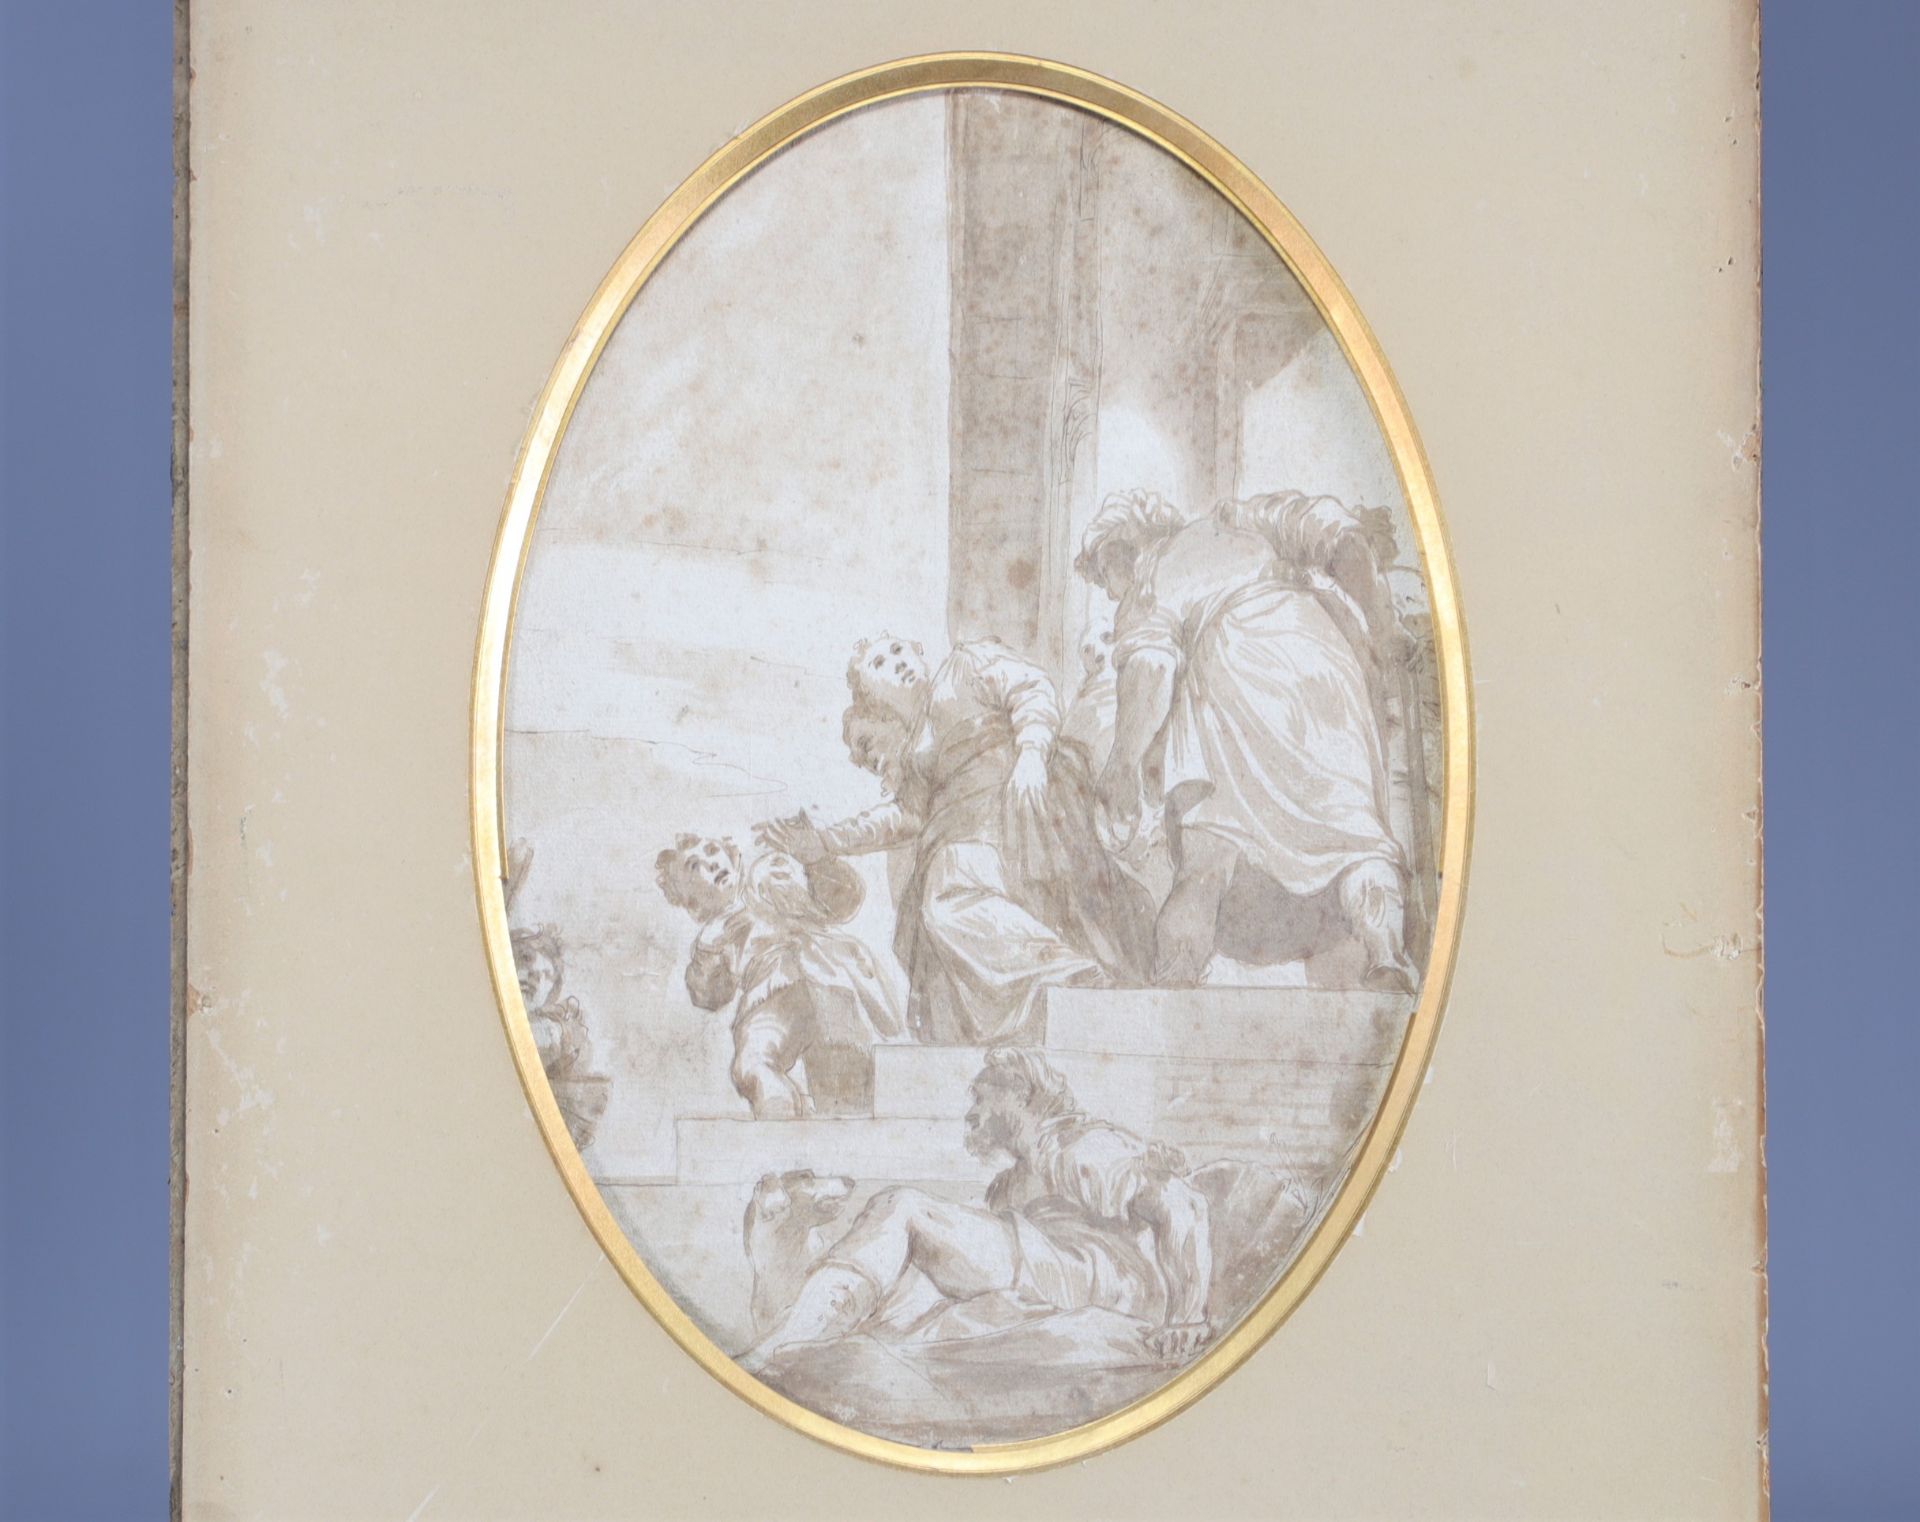 Drawing in Tiepolo style from 17th centuryÂ